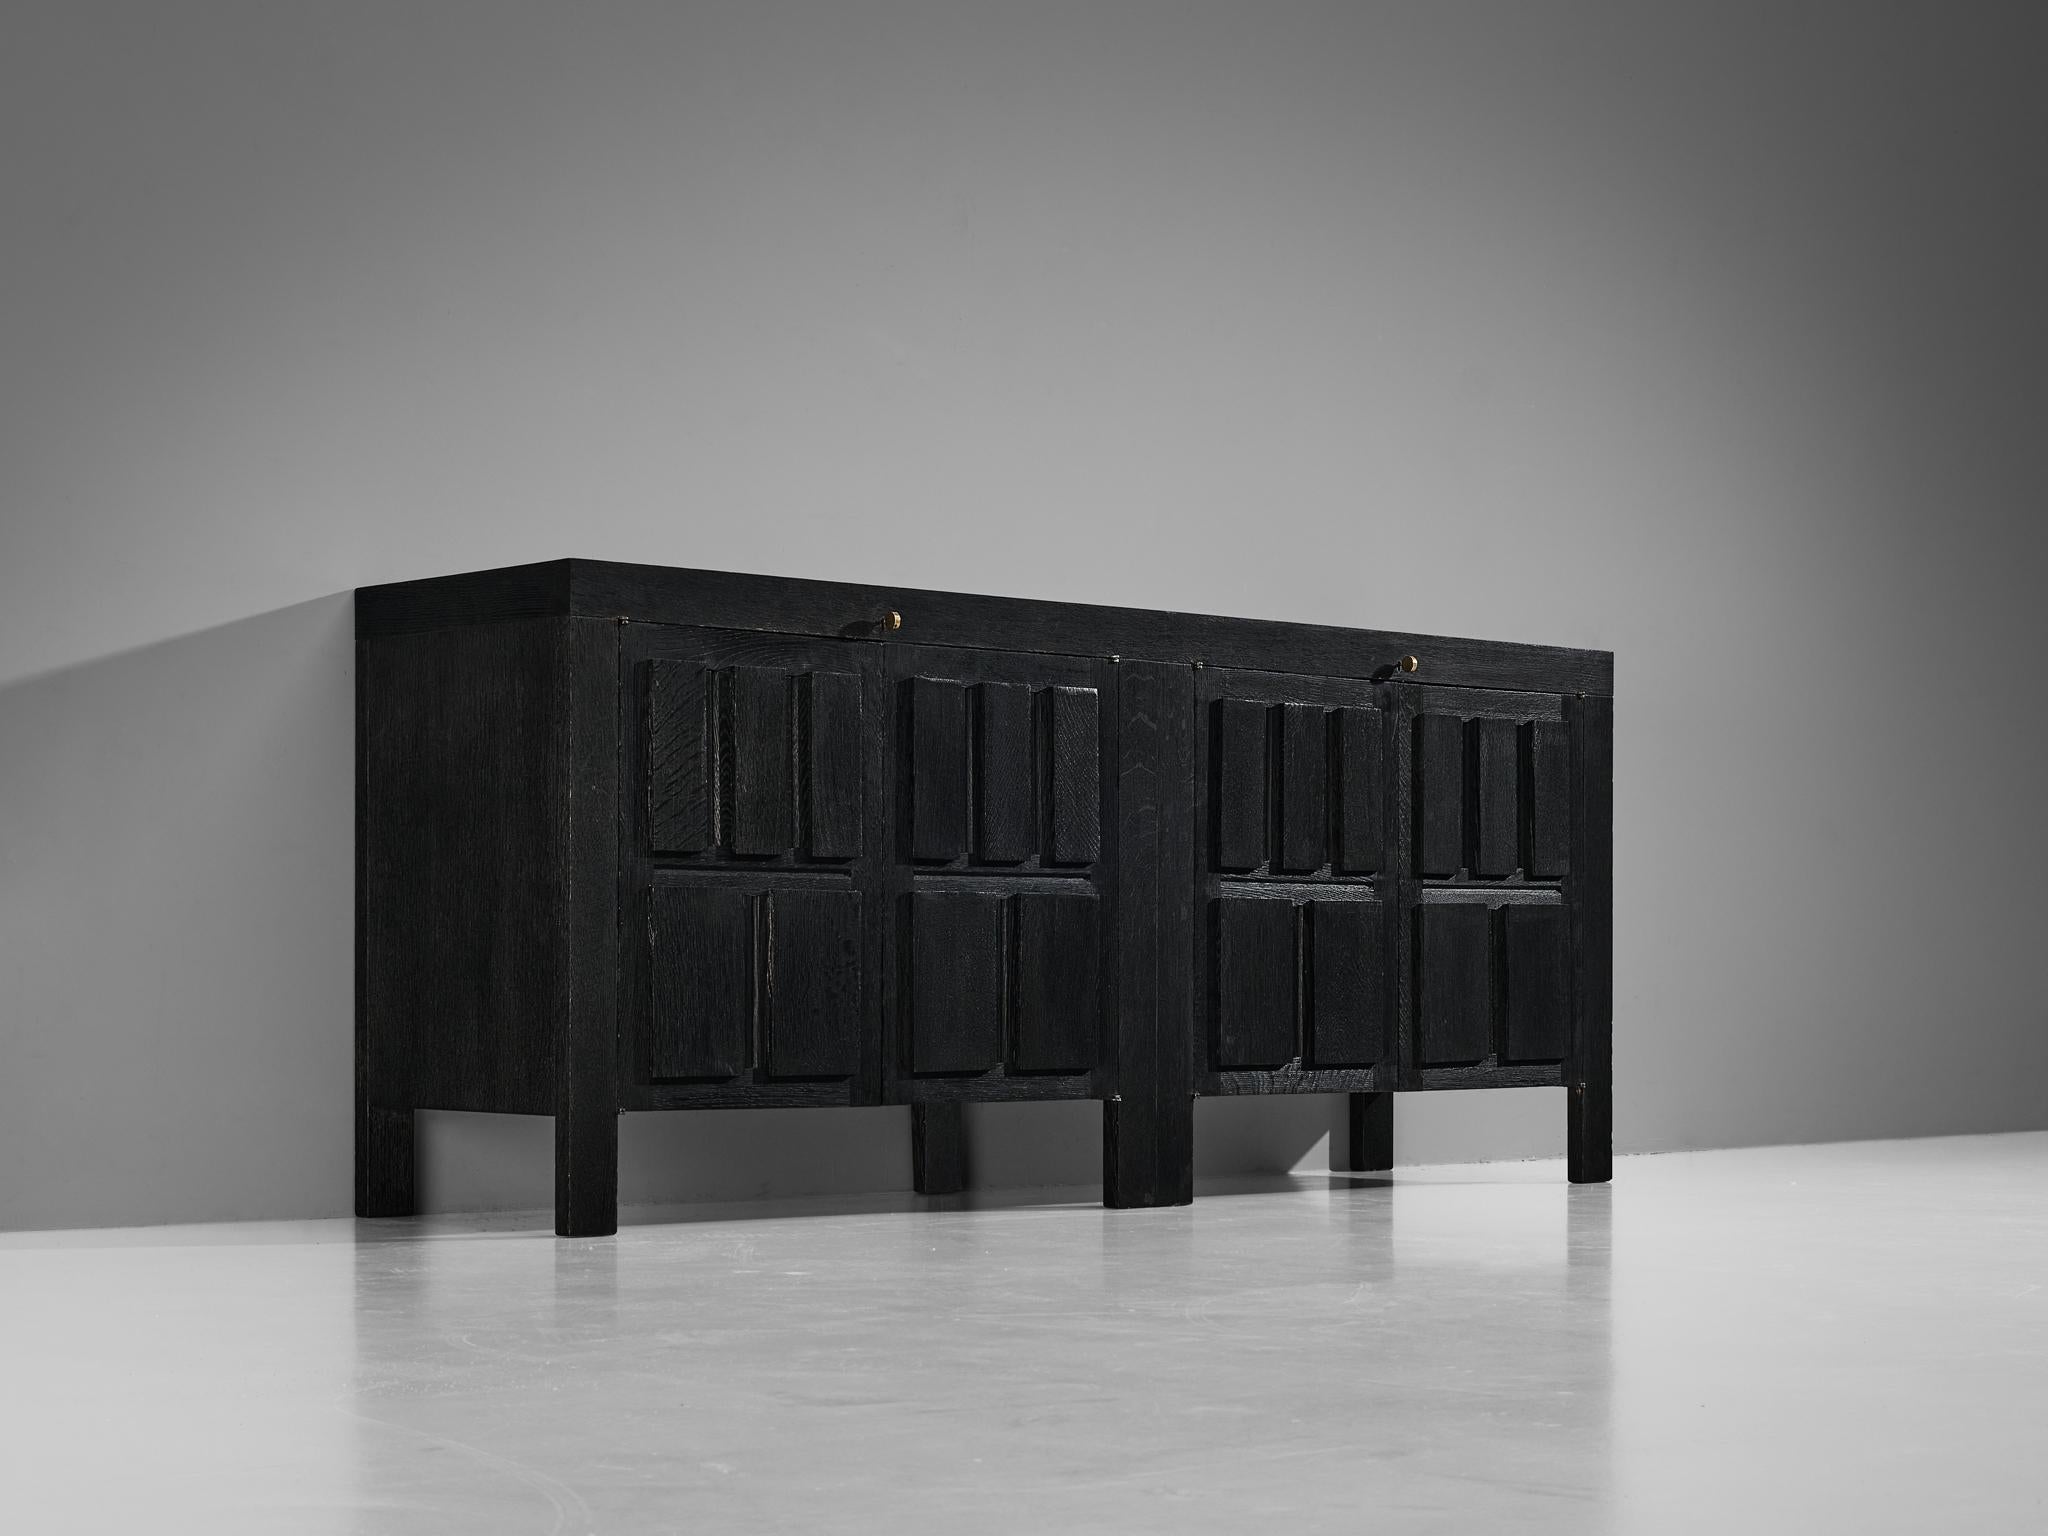 Sideboard, black lacquered oak, metal, Belgium, 1970s

This Belgian sideboard by features a clear rhythm and flow established by means of a well thought through lay out that is utterly well-balanced. The carved geometrical shapes on the door panels